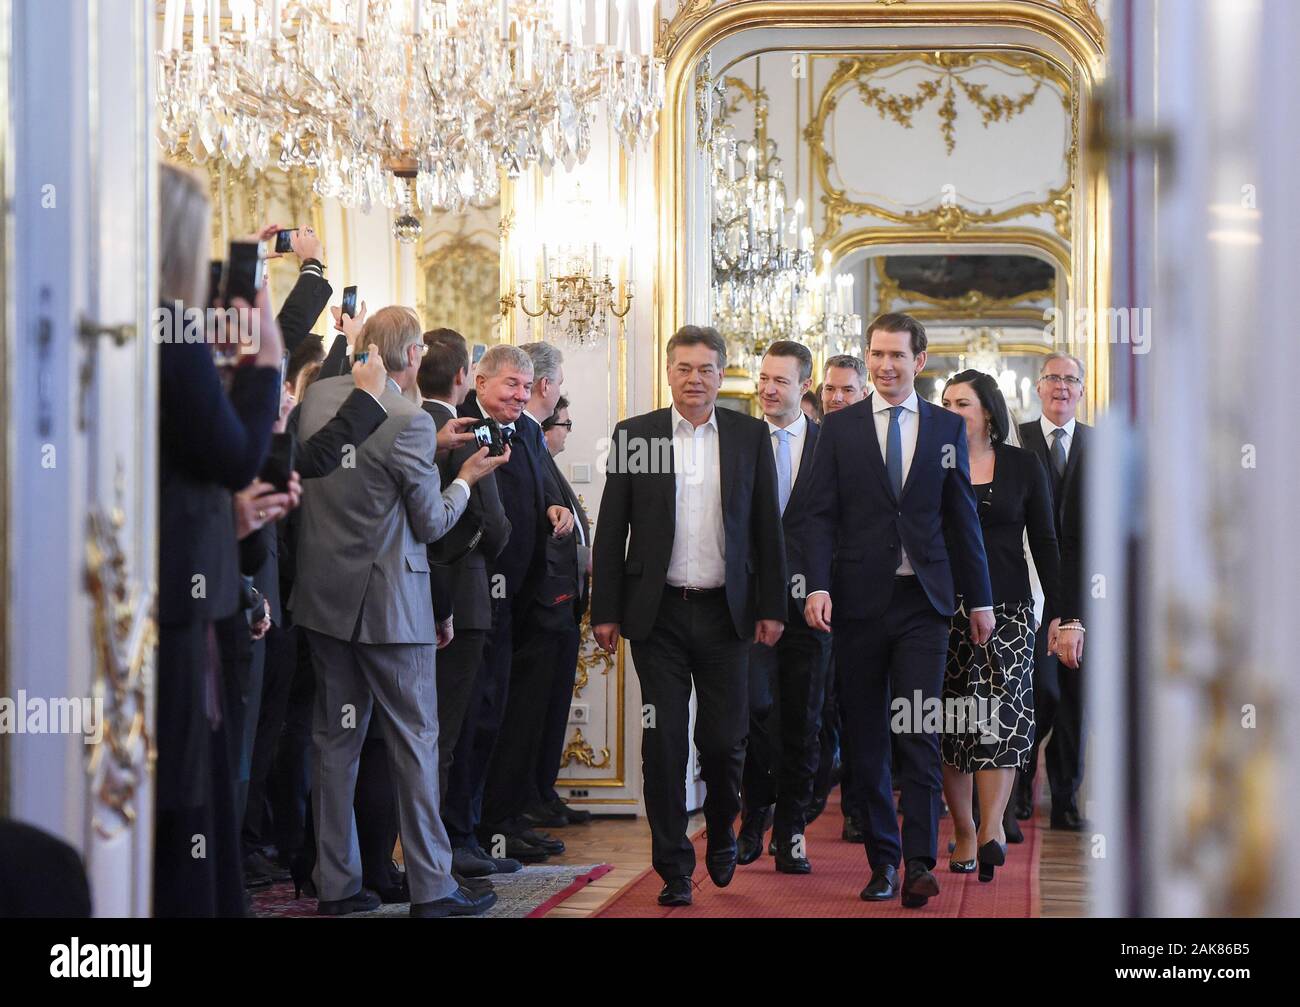 Beijing, Autstria. 7th Jan, 2020. Austria's new Chancellor Sebastian Kurz (1st R Front) and new Vice Chancellor Werner Kogler (2nd R Front) enter the swearing-in ceremony in Vienna, Autstria, Jan. 7, 2020. Austria's new coalition government was sworn in on Tuesday. Credit: Guo Chen/Xinhua/Alamy Live News Stock Photo